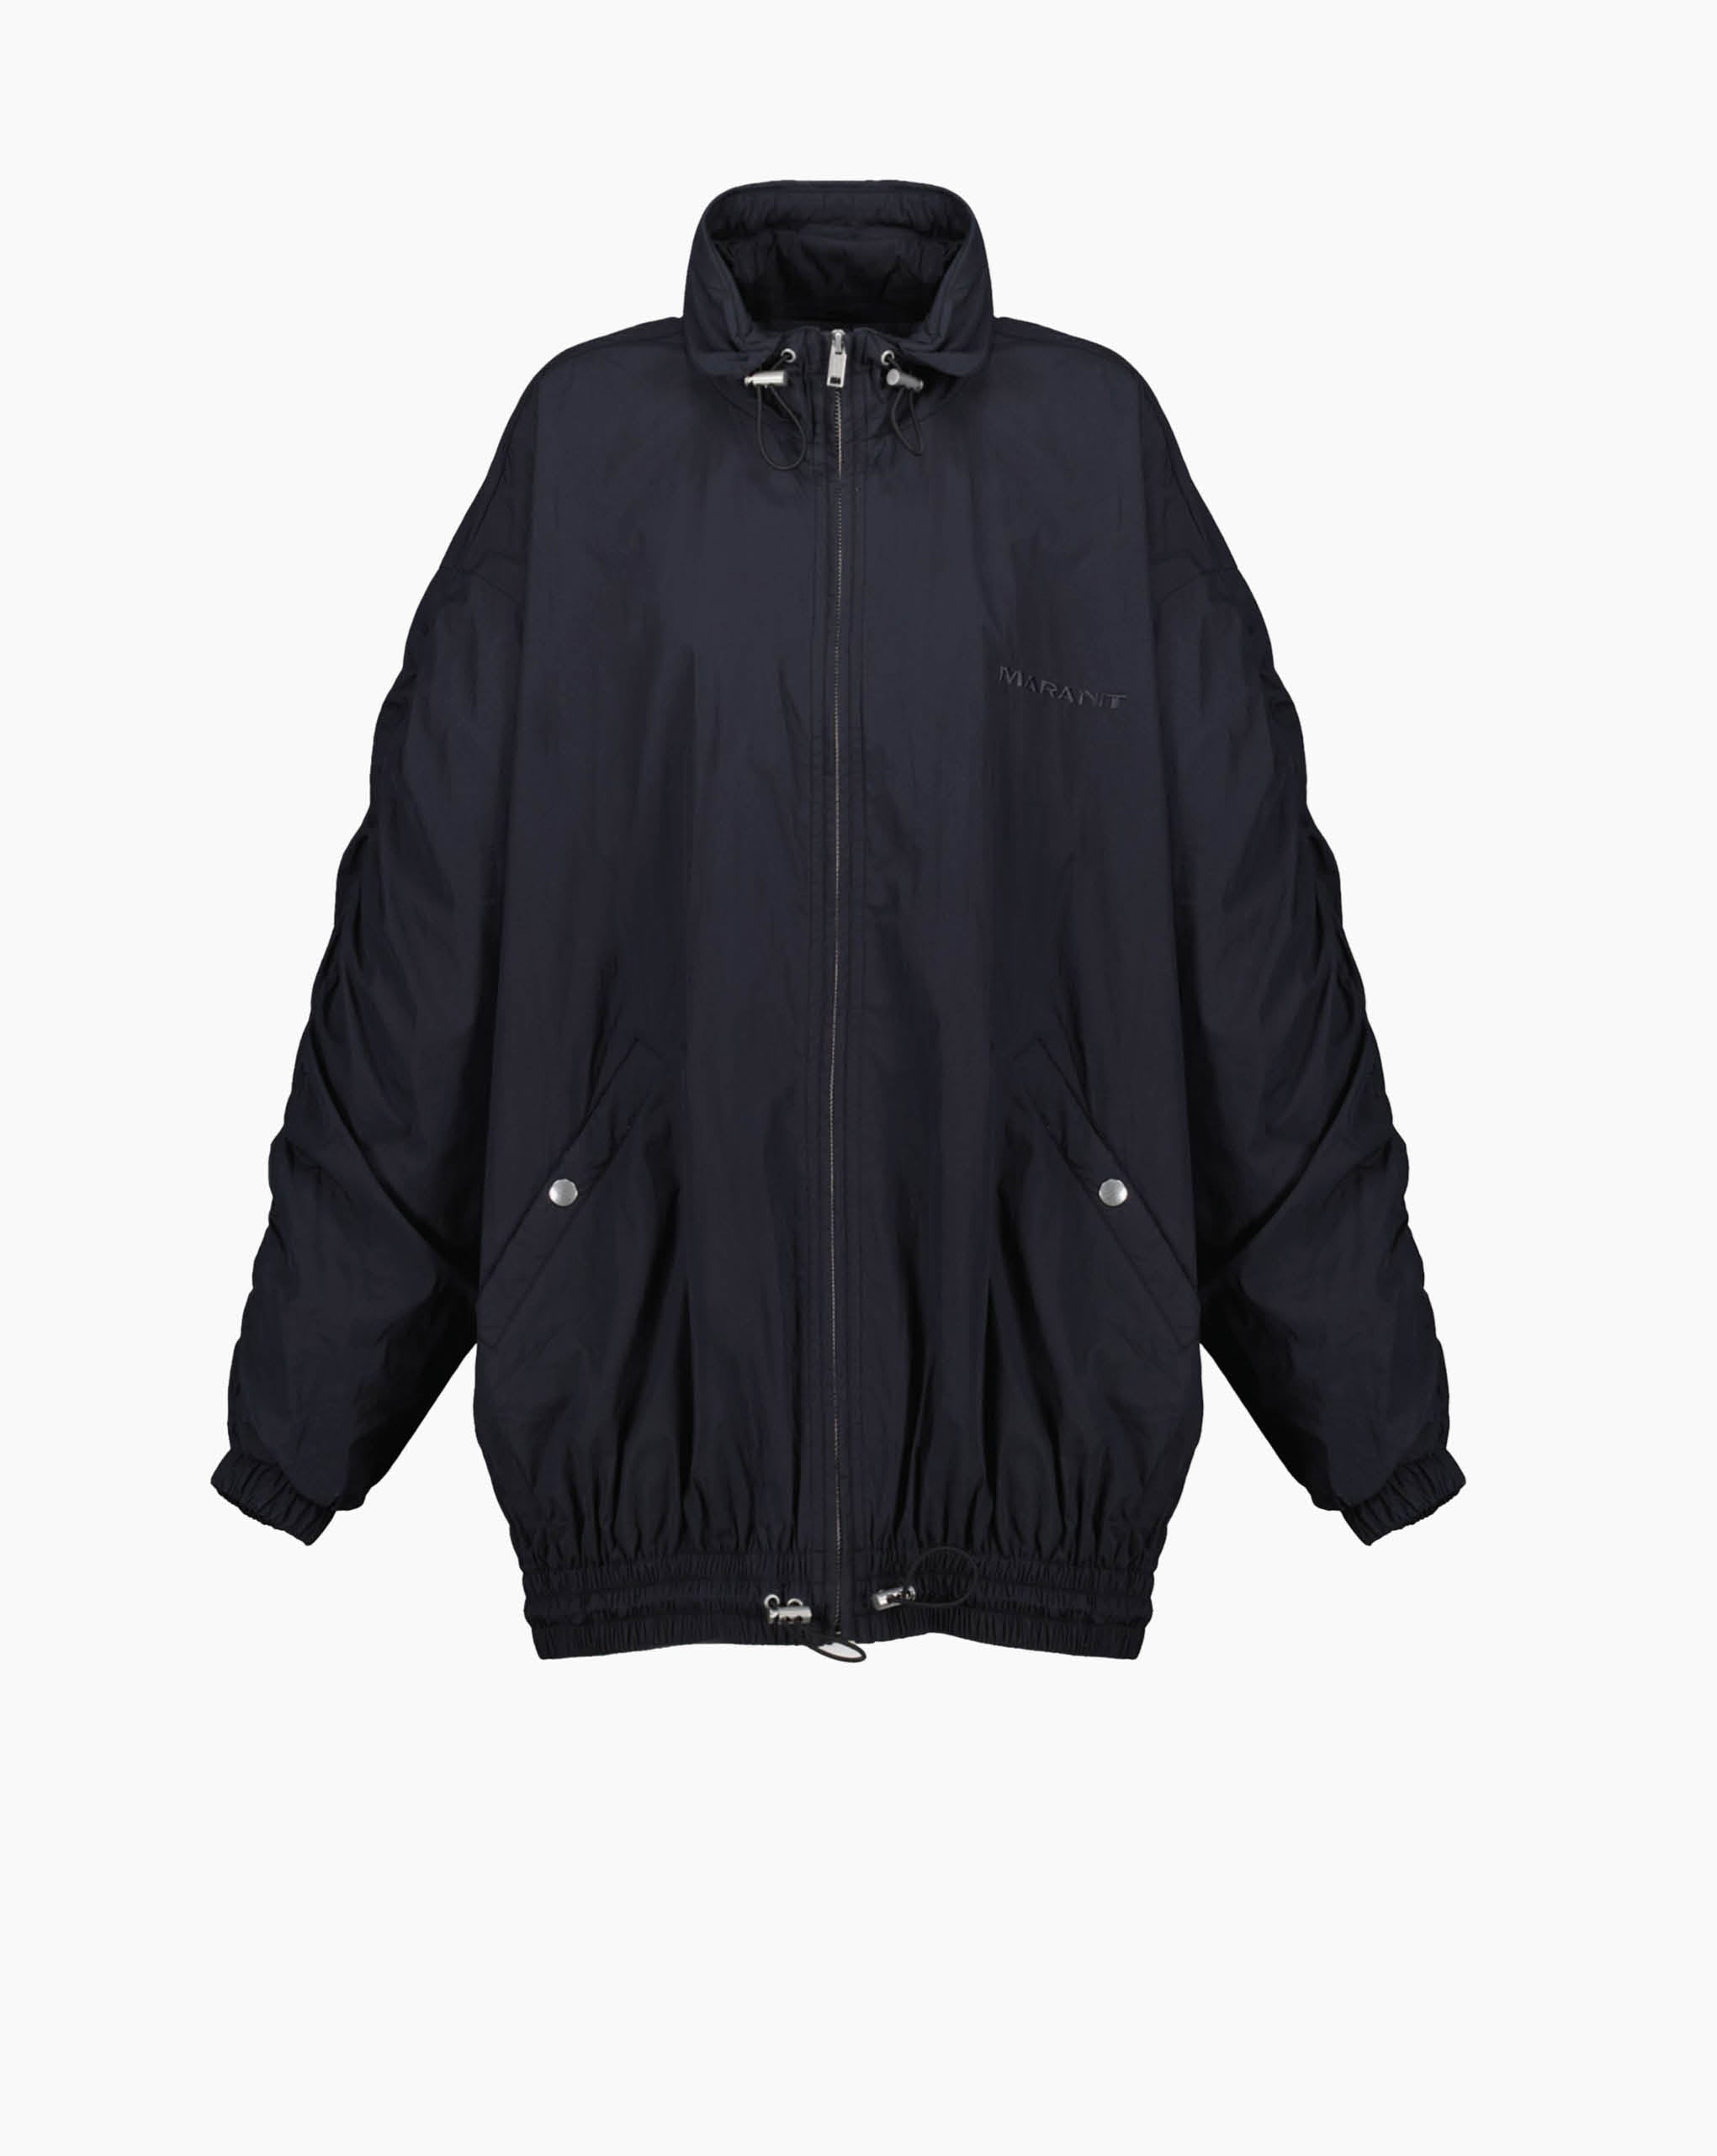 Buster Jacket Faded Black